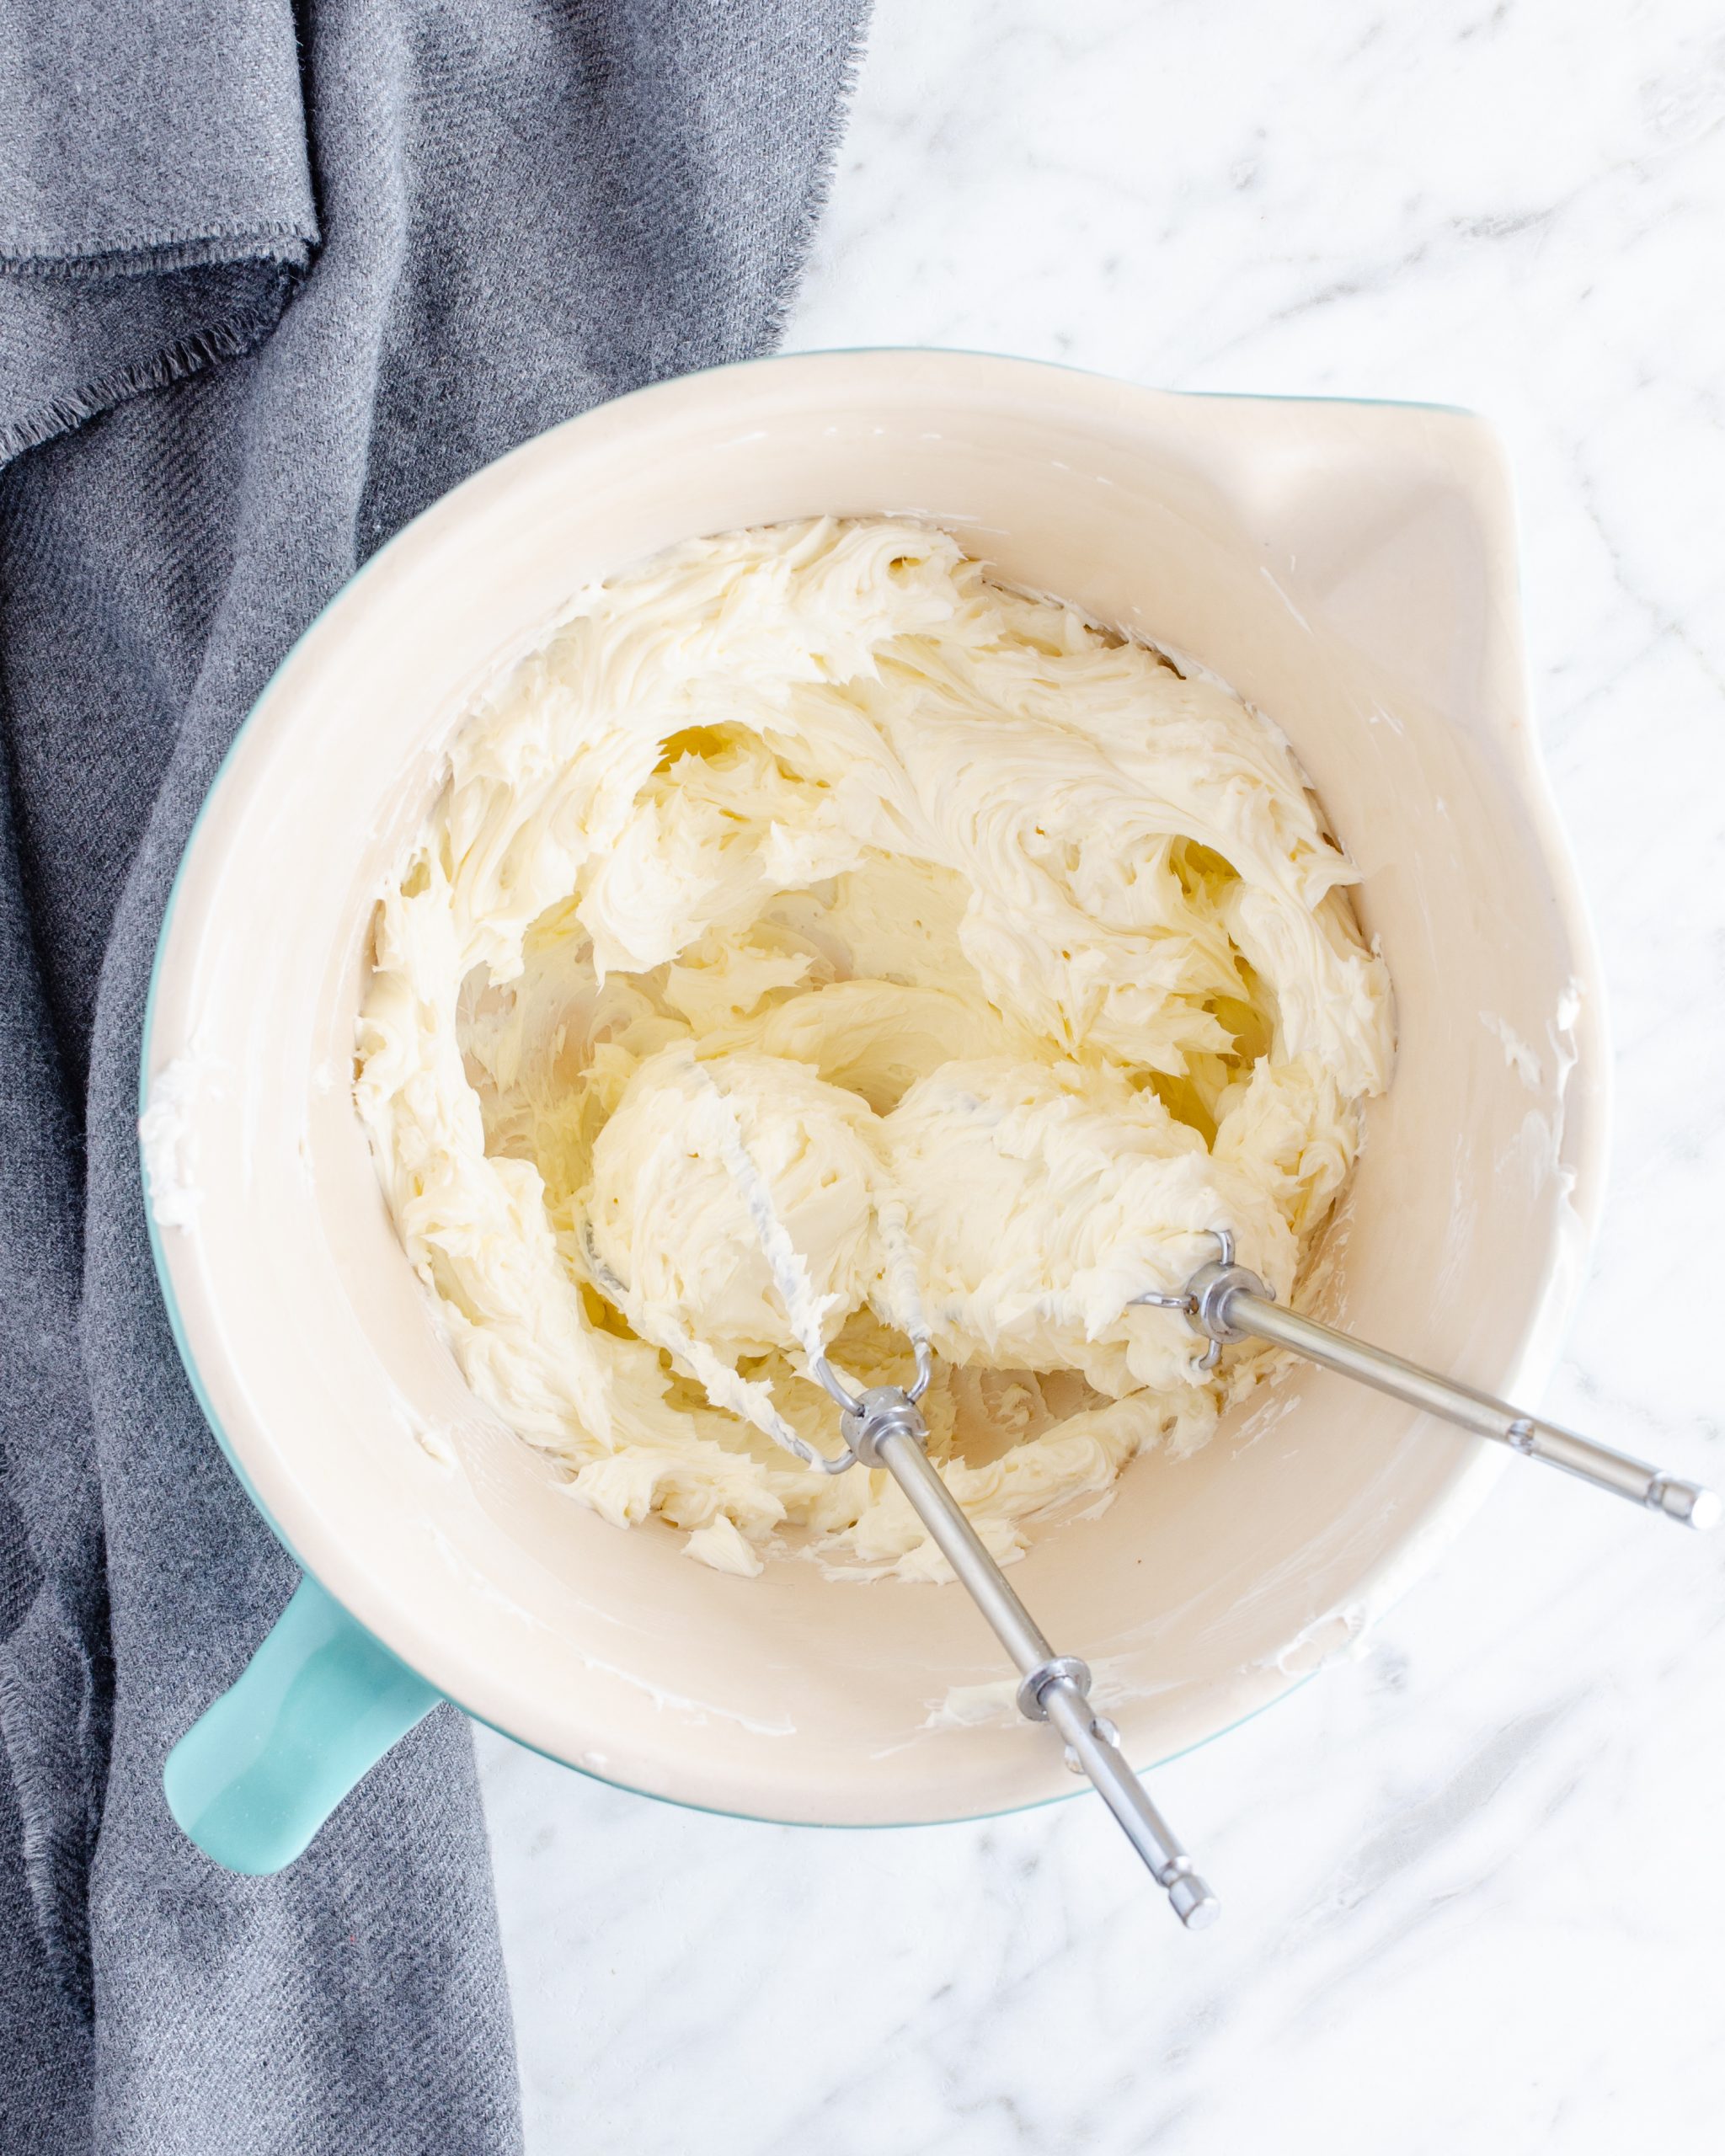 Place the cream cheese into a mixing bowl and blend until smooth. 